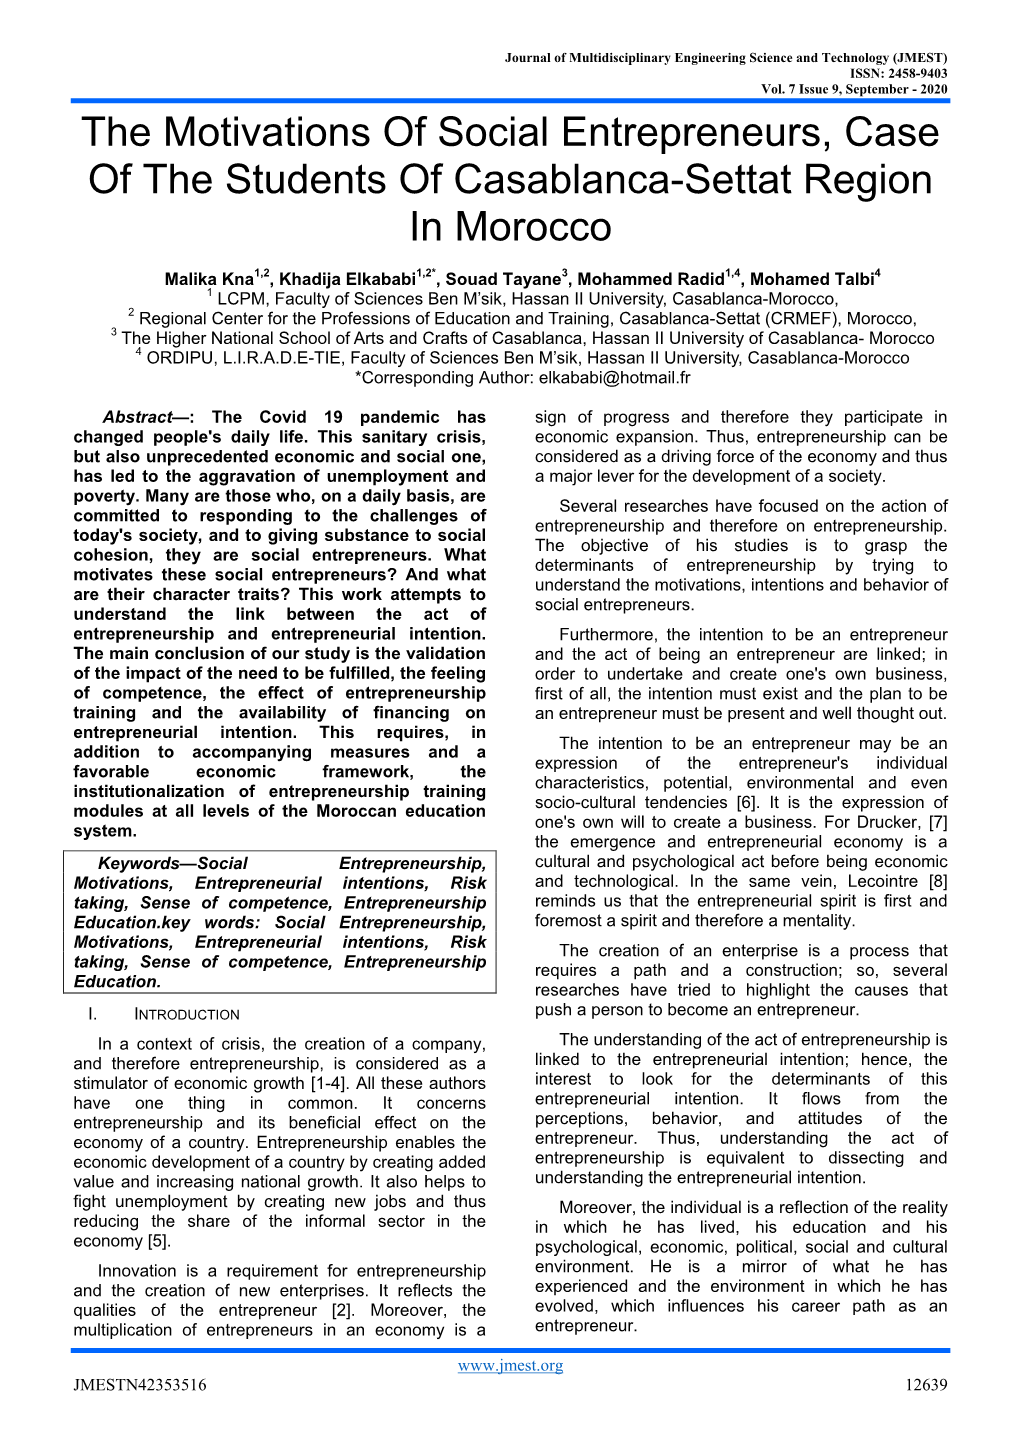 The Motivations of Social Entrepreneurs, Case of the Students of Casablanca-Settat Region in Morocco